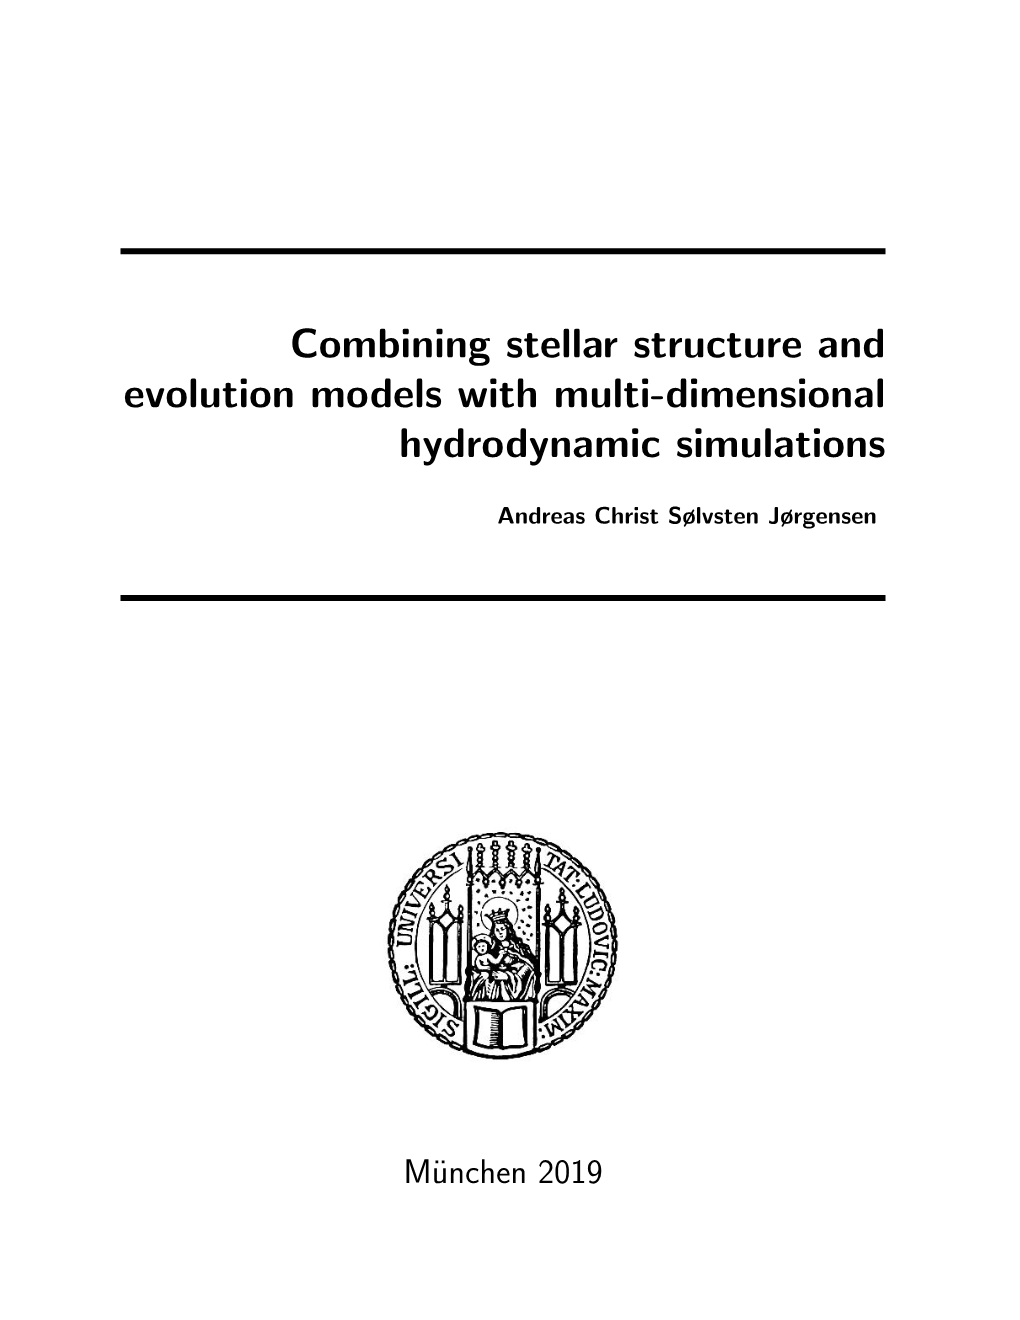 Combining Stellar Structure and Evolution Models with Multi-Dimensional Hydrodynamic Simulations